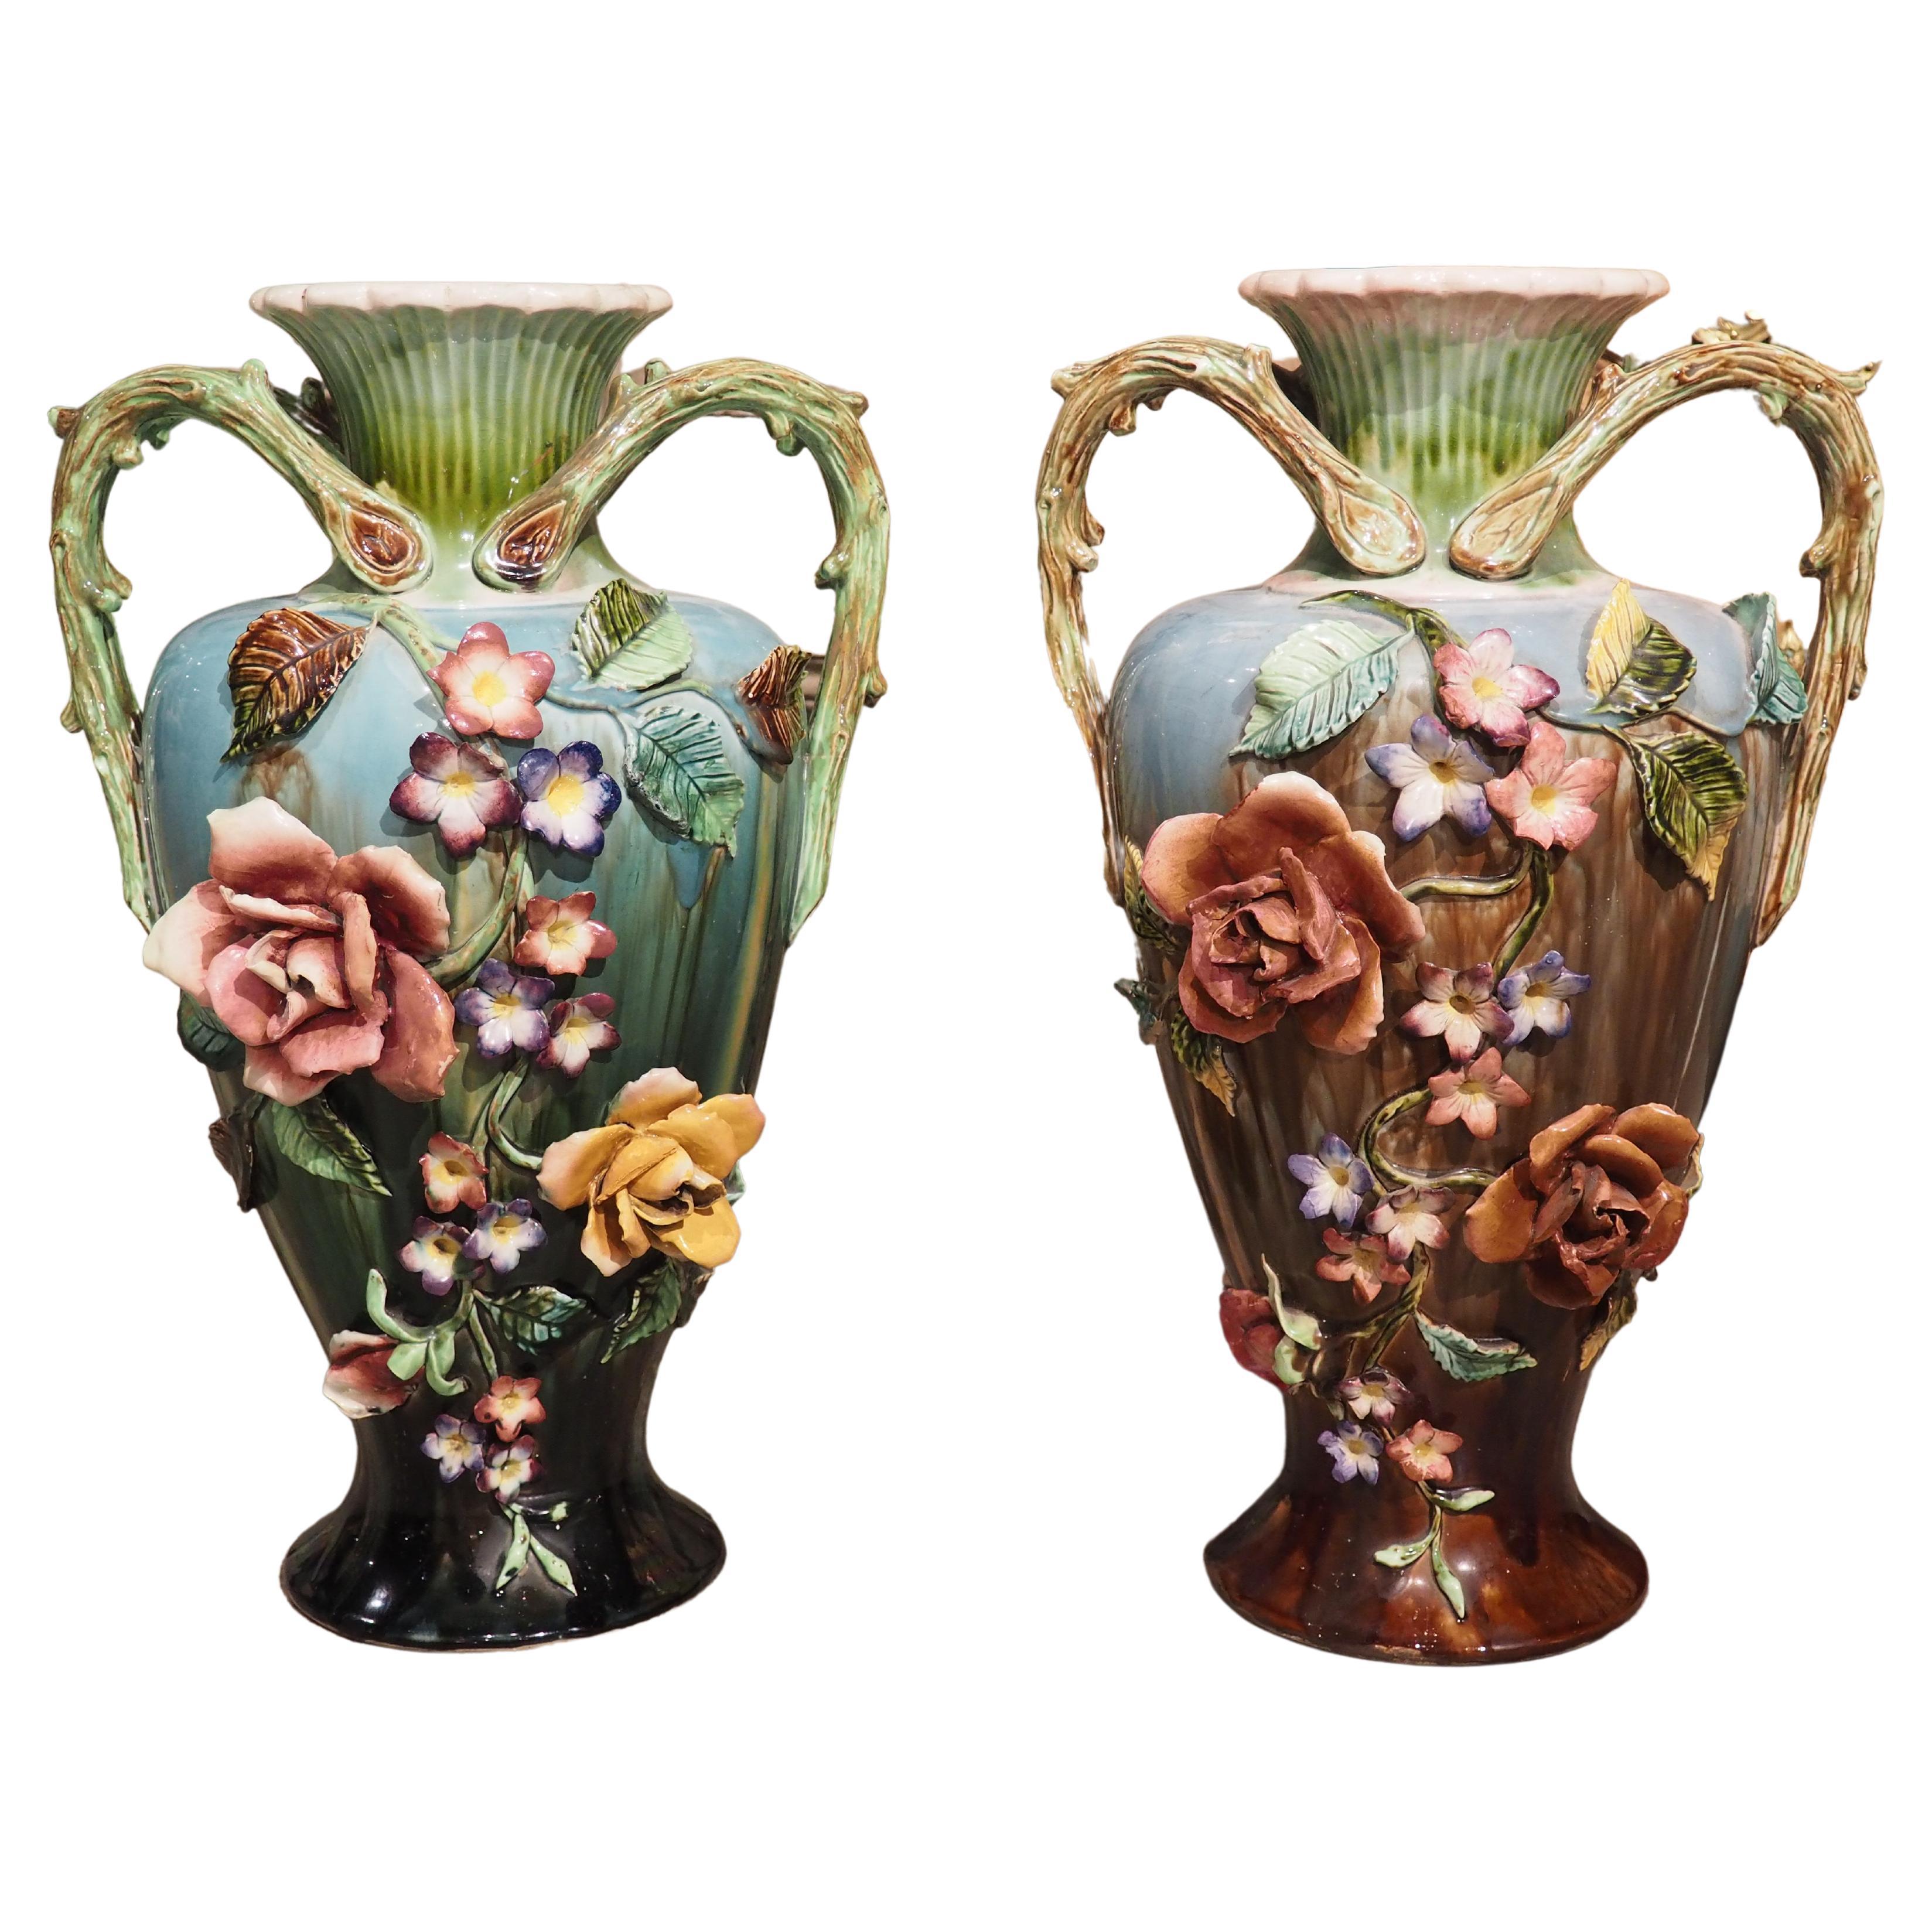 Pair of Large Antique French Art Nouveau Period Gros Relief Barbotine Vases For Sale